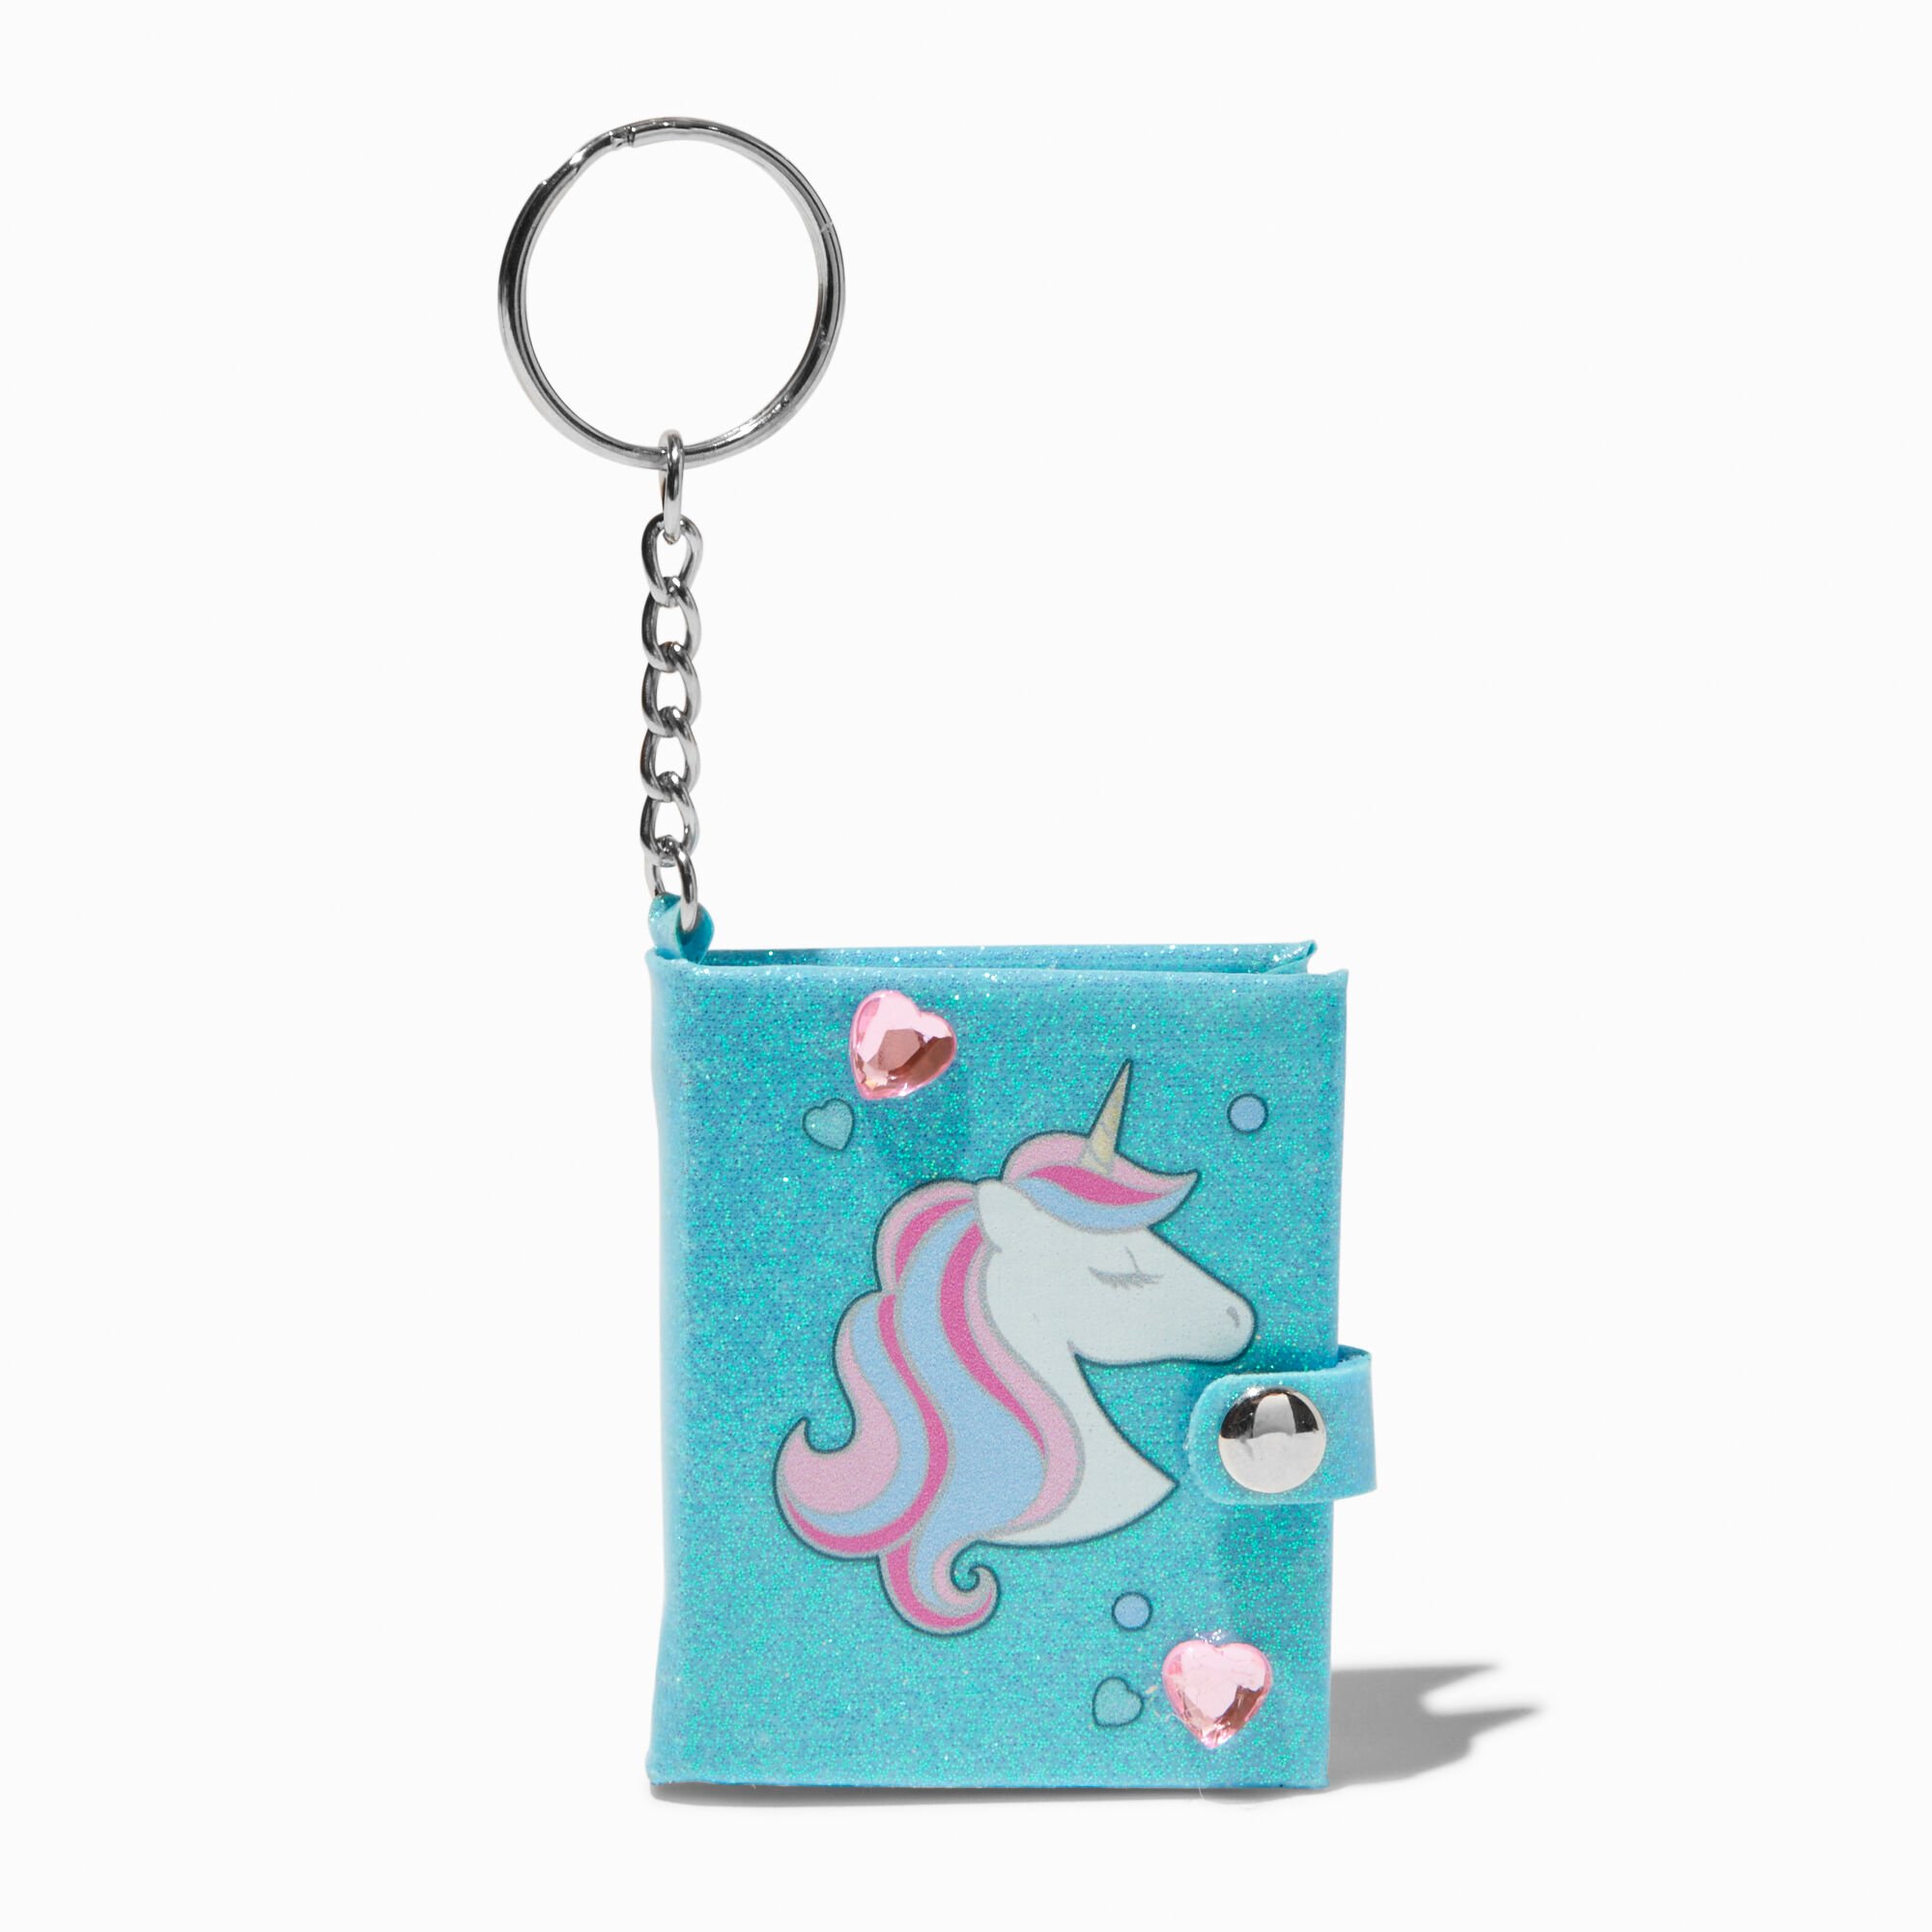 View Claires Unicorn Heart Gem Mini Diary Keyring information